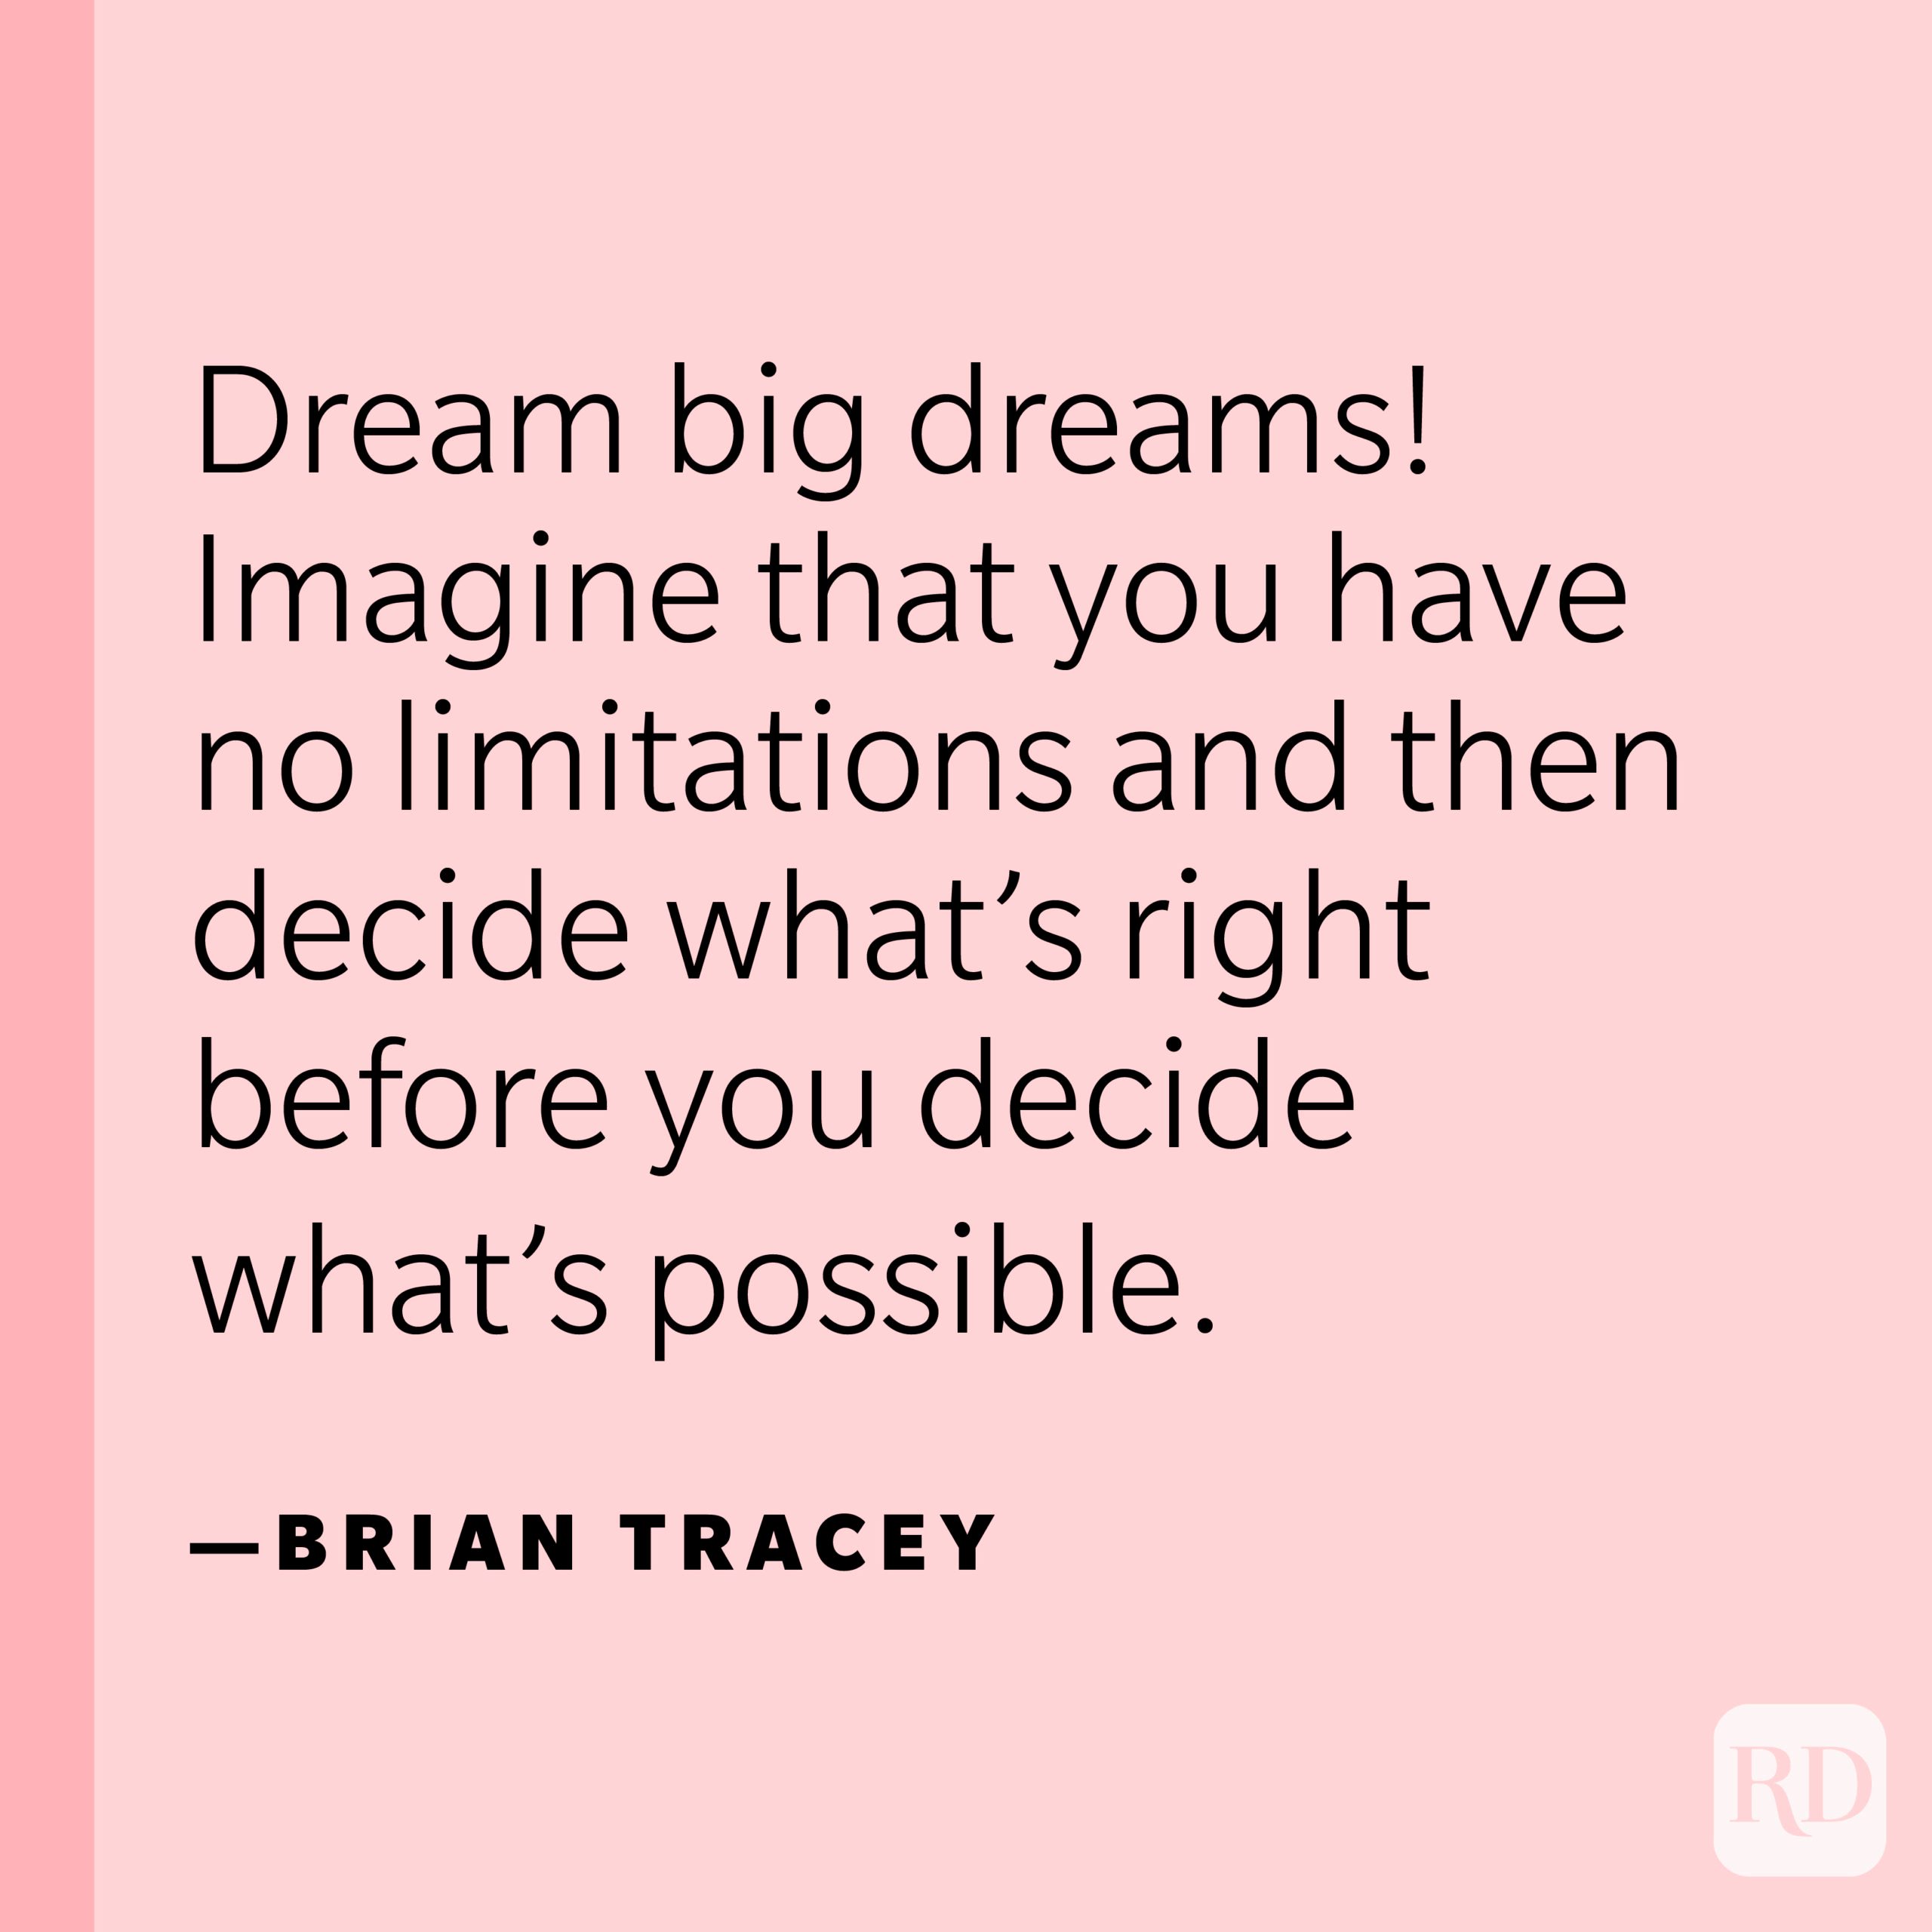 “Dream big dreams! Imagine that you have no limitations and then decide what’s right before you decide what’s possible.” —Brian Tracey